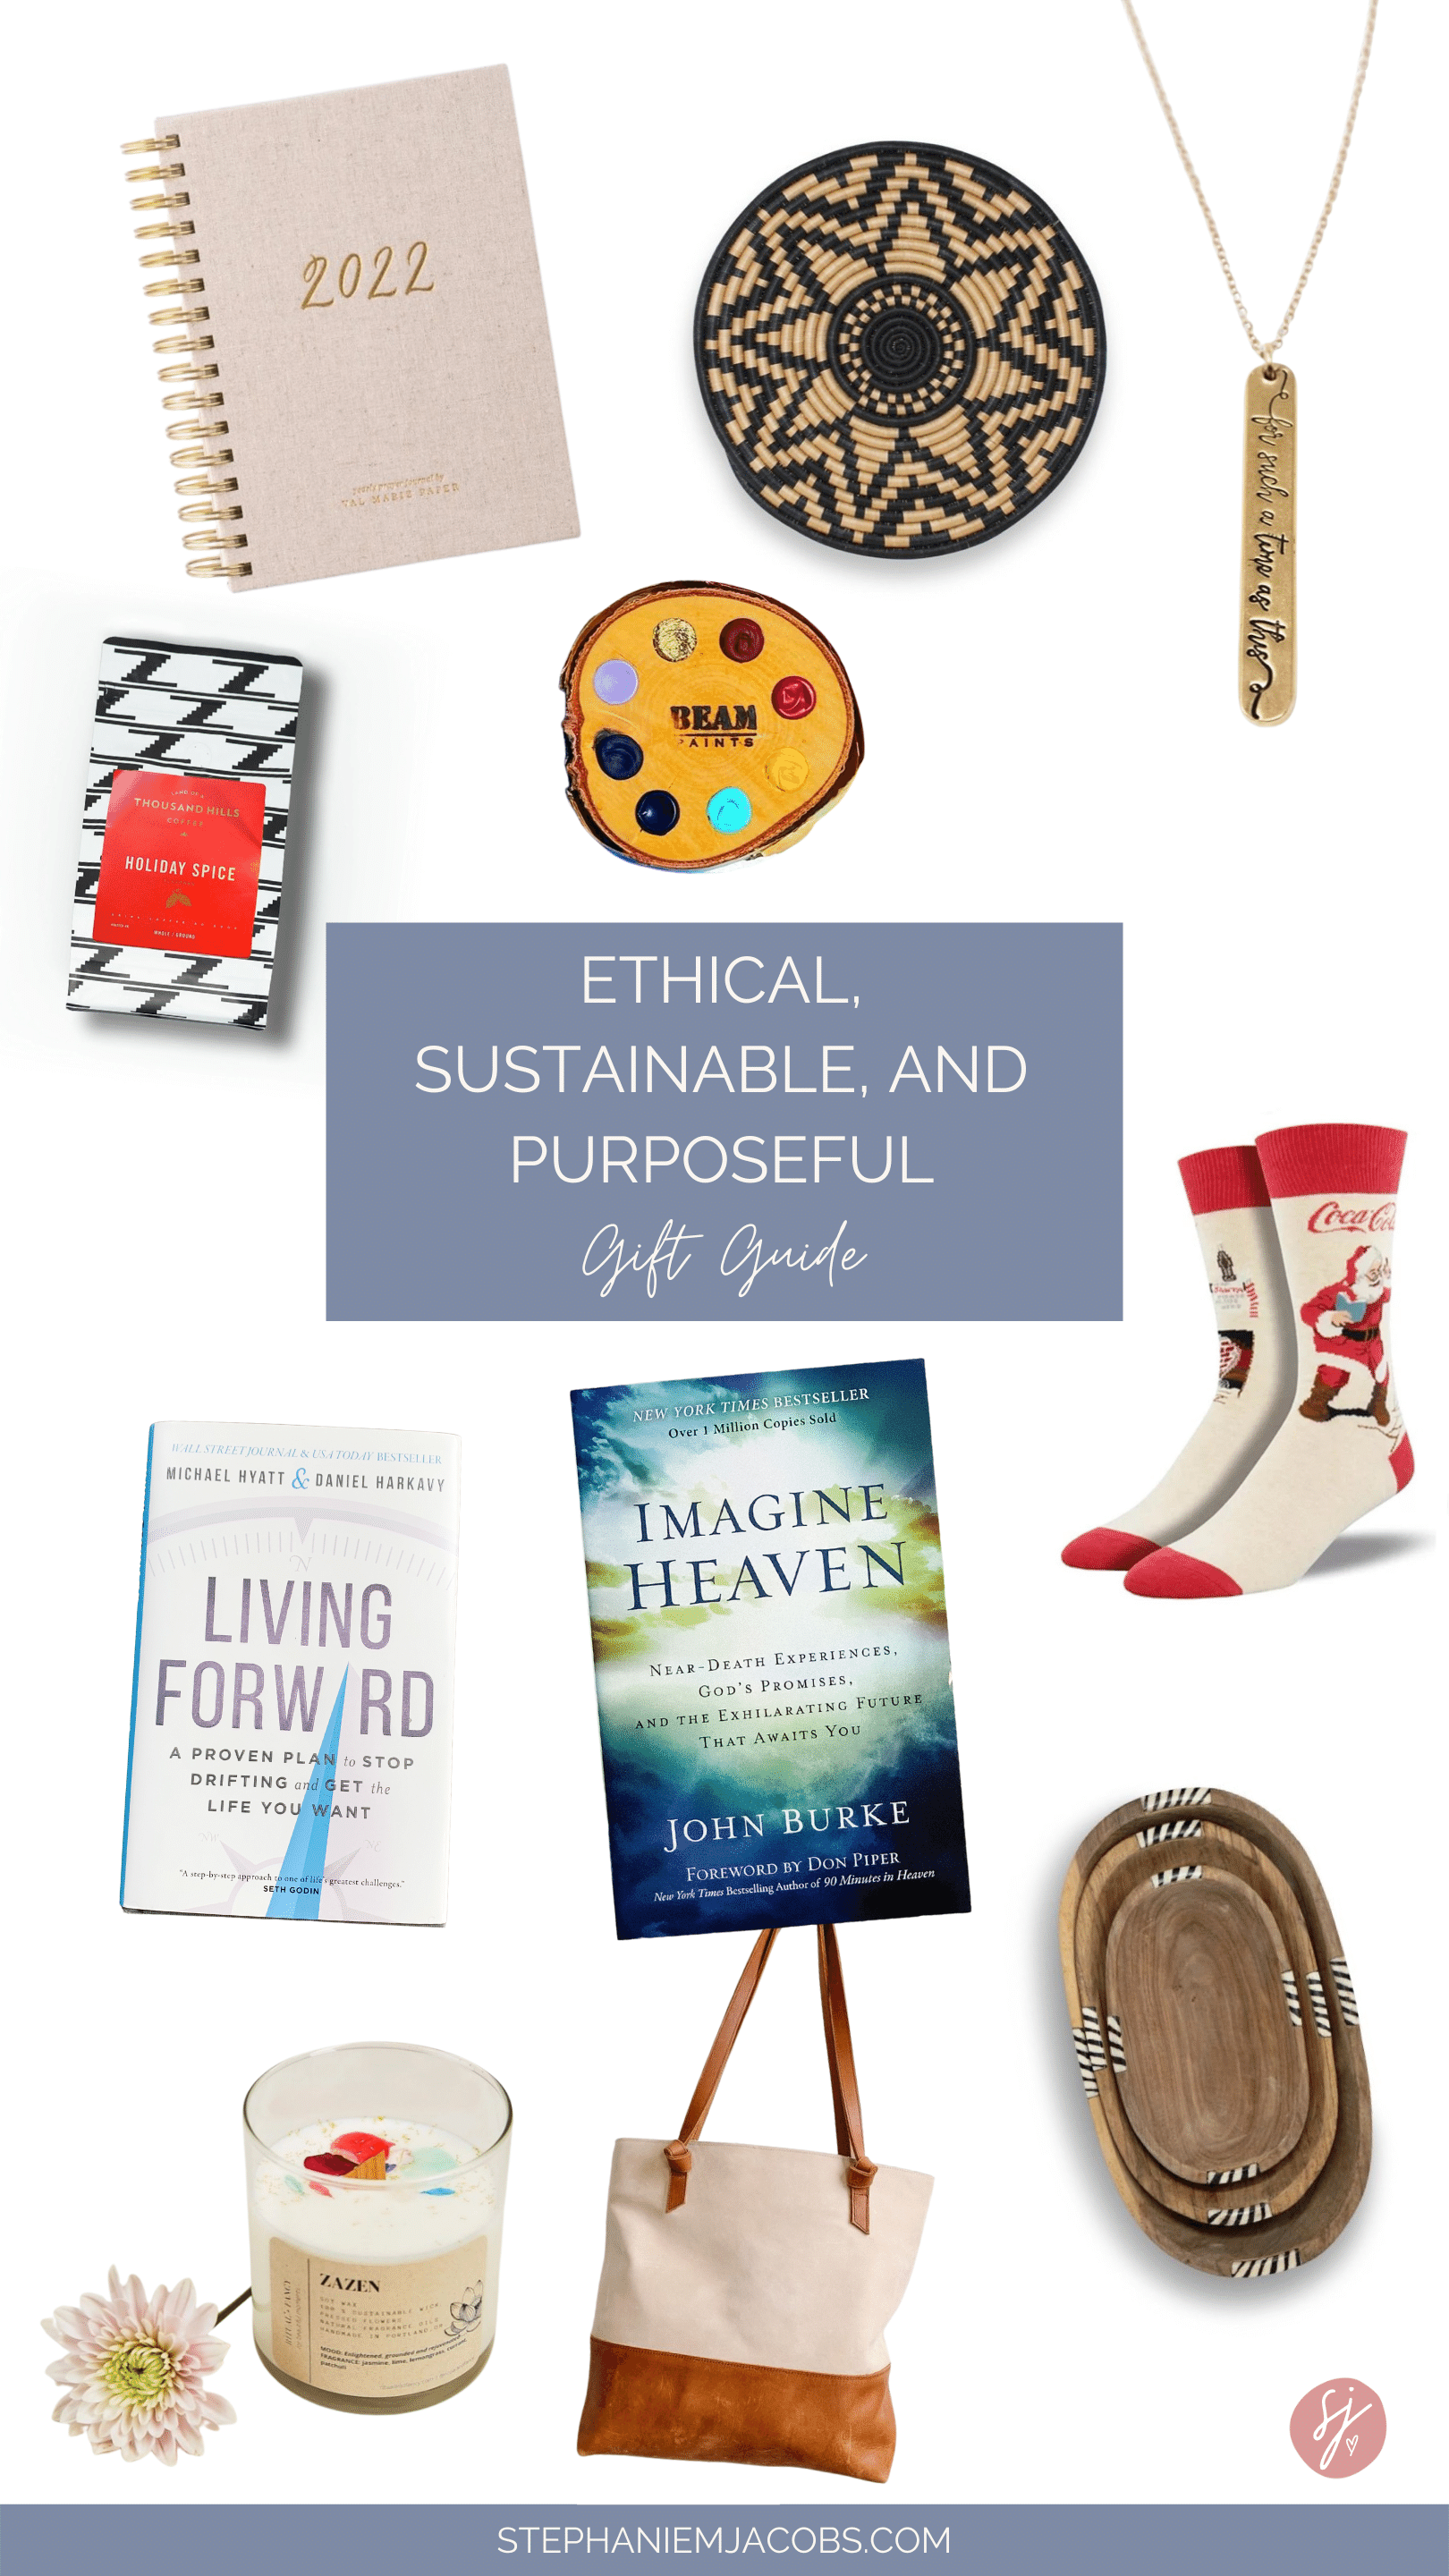 Stephanie Jacobs_Ethical_Sustainable_Purposeful_Gift Guide. copy-min